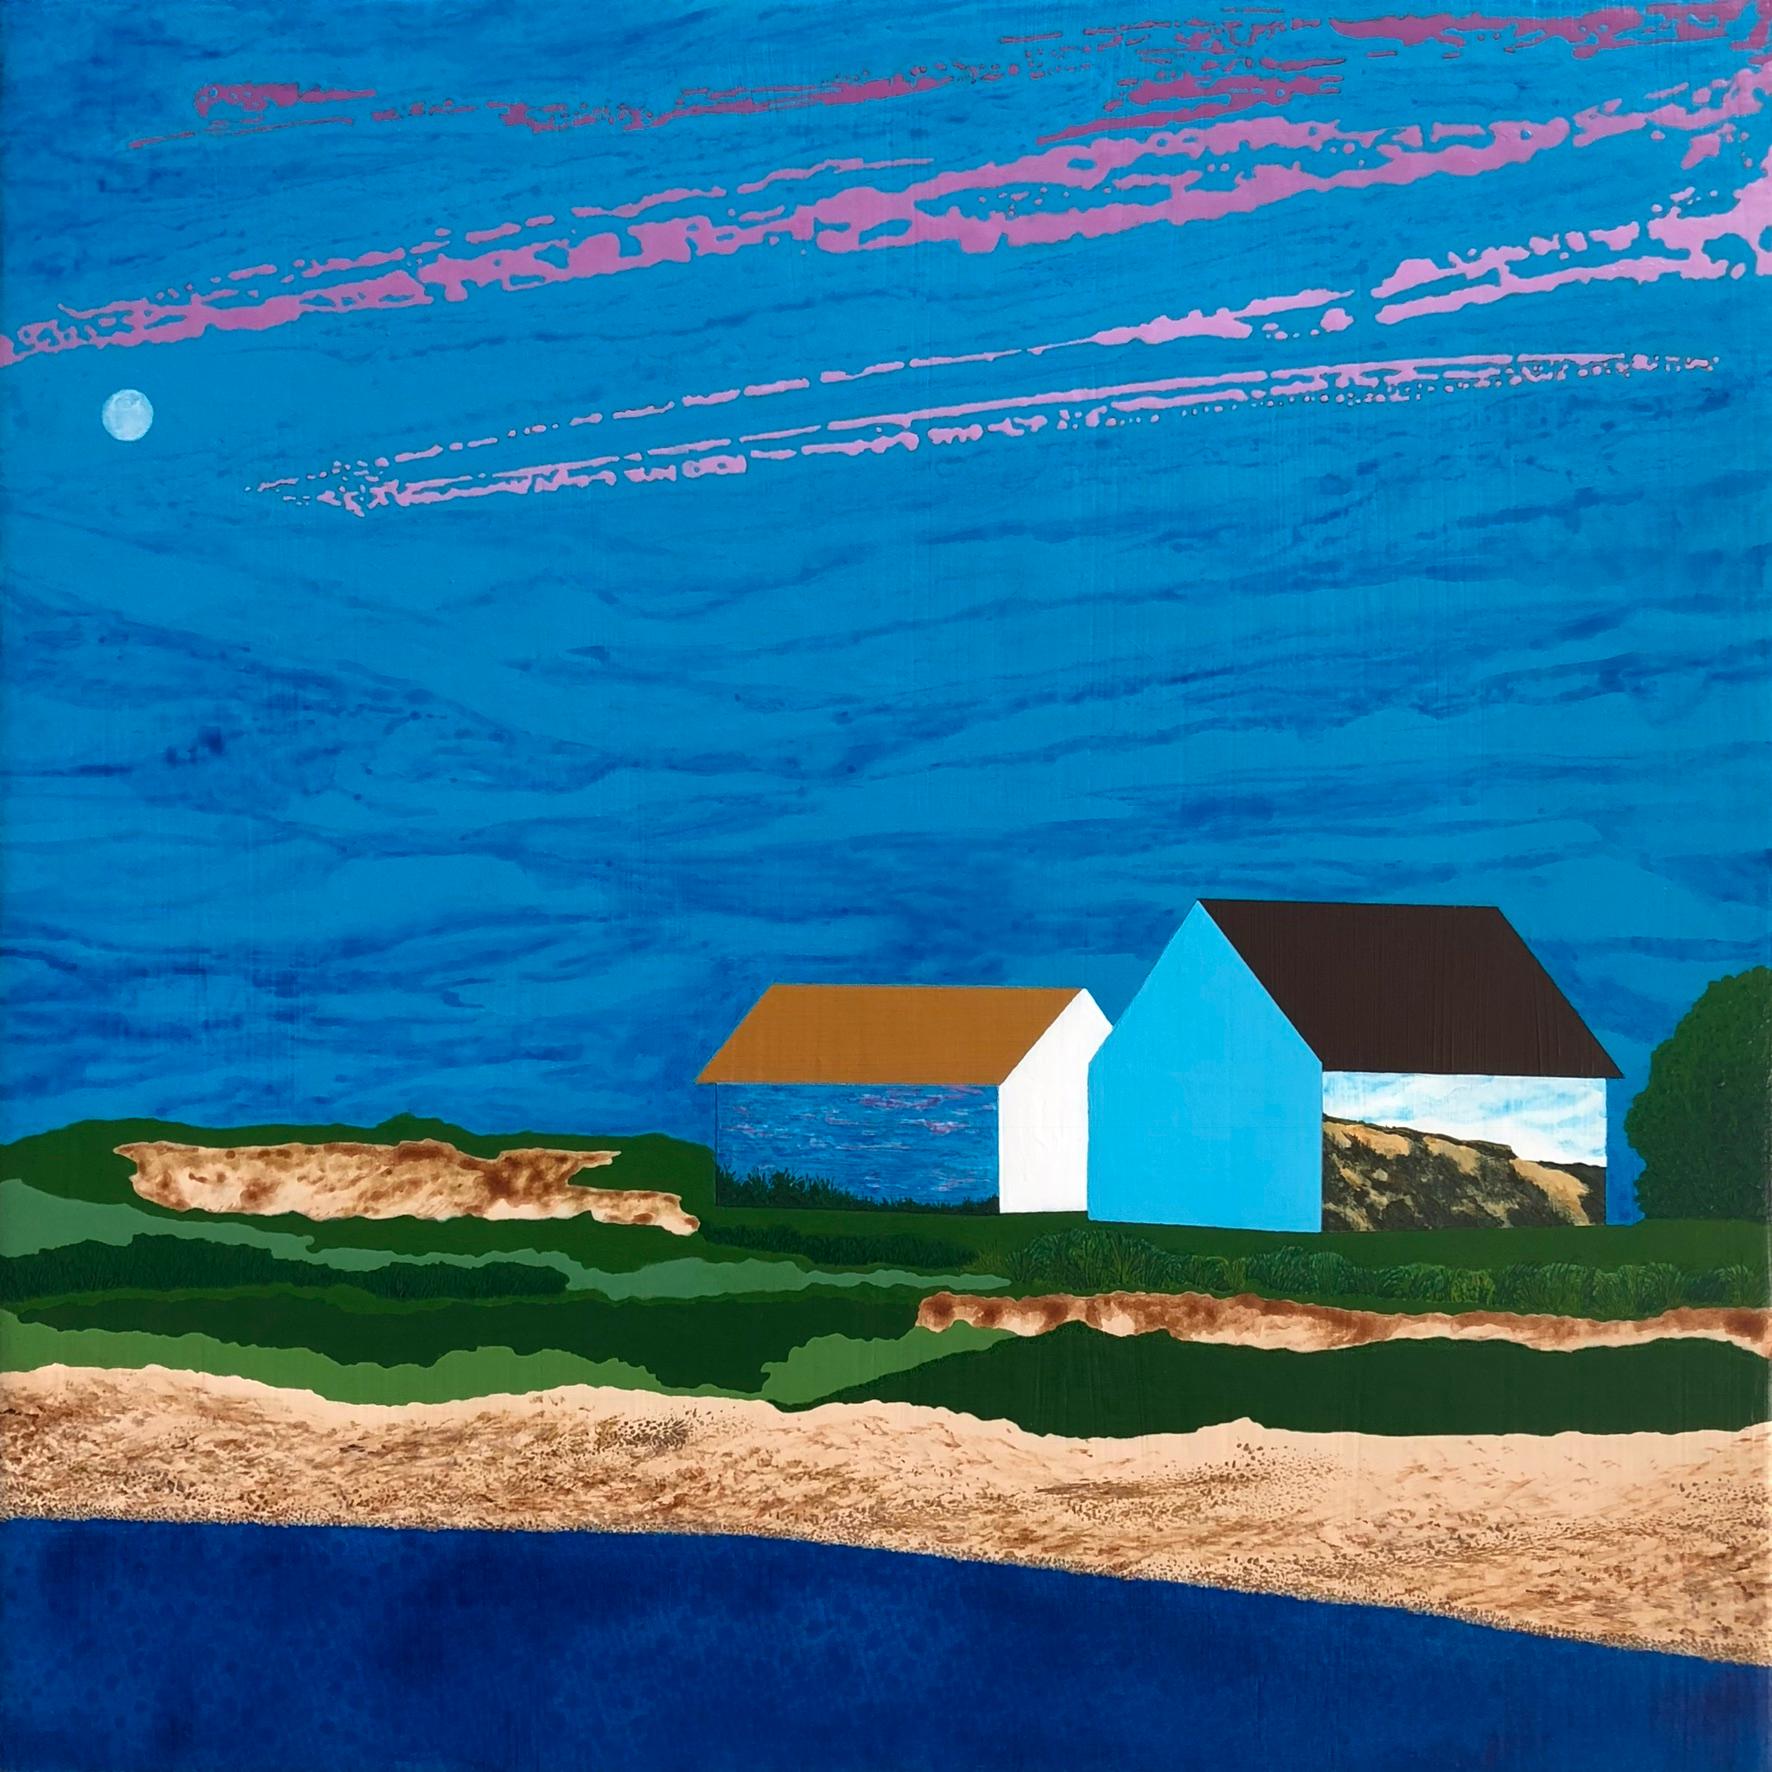 James Isherwood Landscape Painting - The Day Moon, houses on the shore, blue skies and beach 